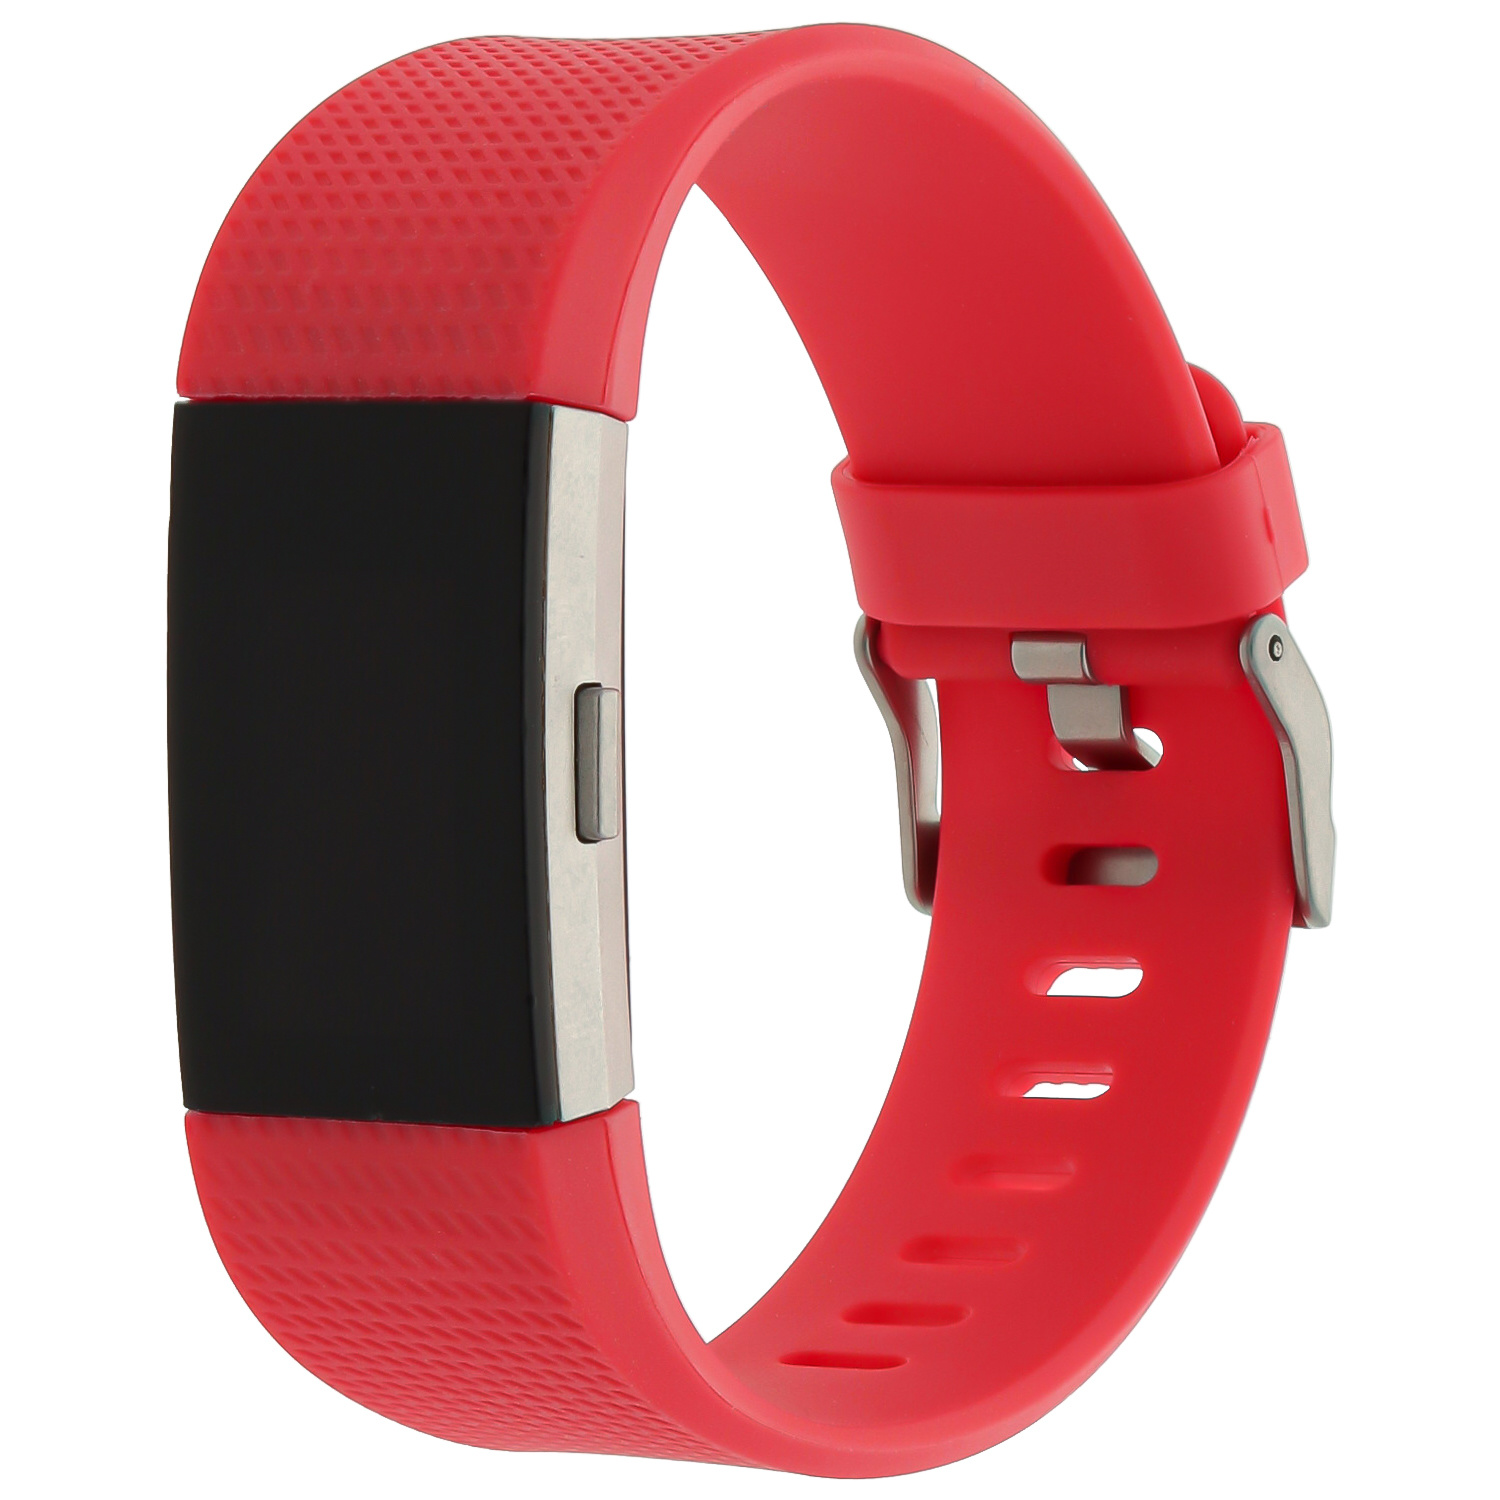 Verovering Rommelig aanvulling Goedkope Fitbit charge 2 sport band - oranje - 123watches B.V.